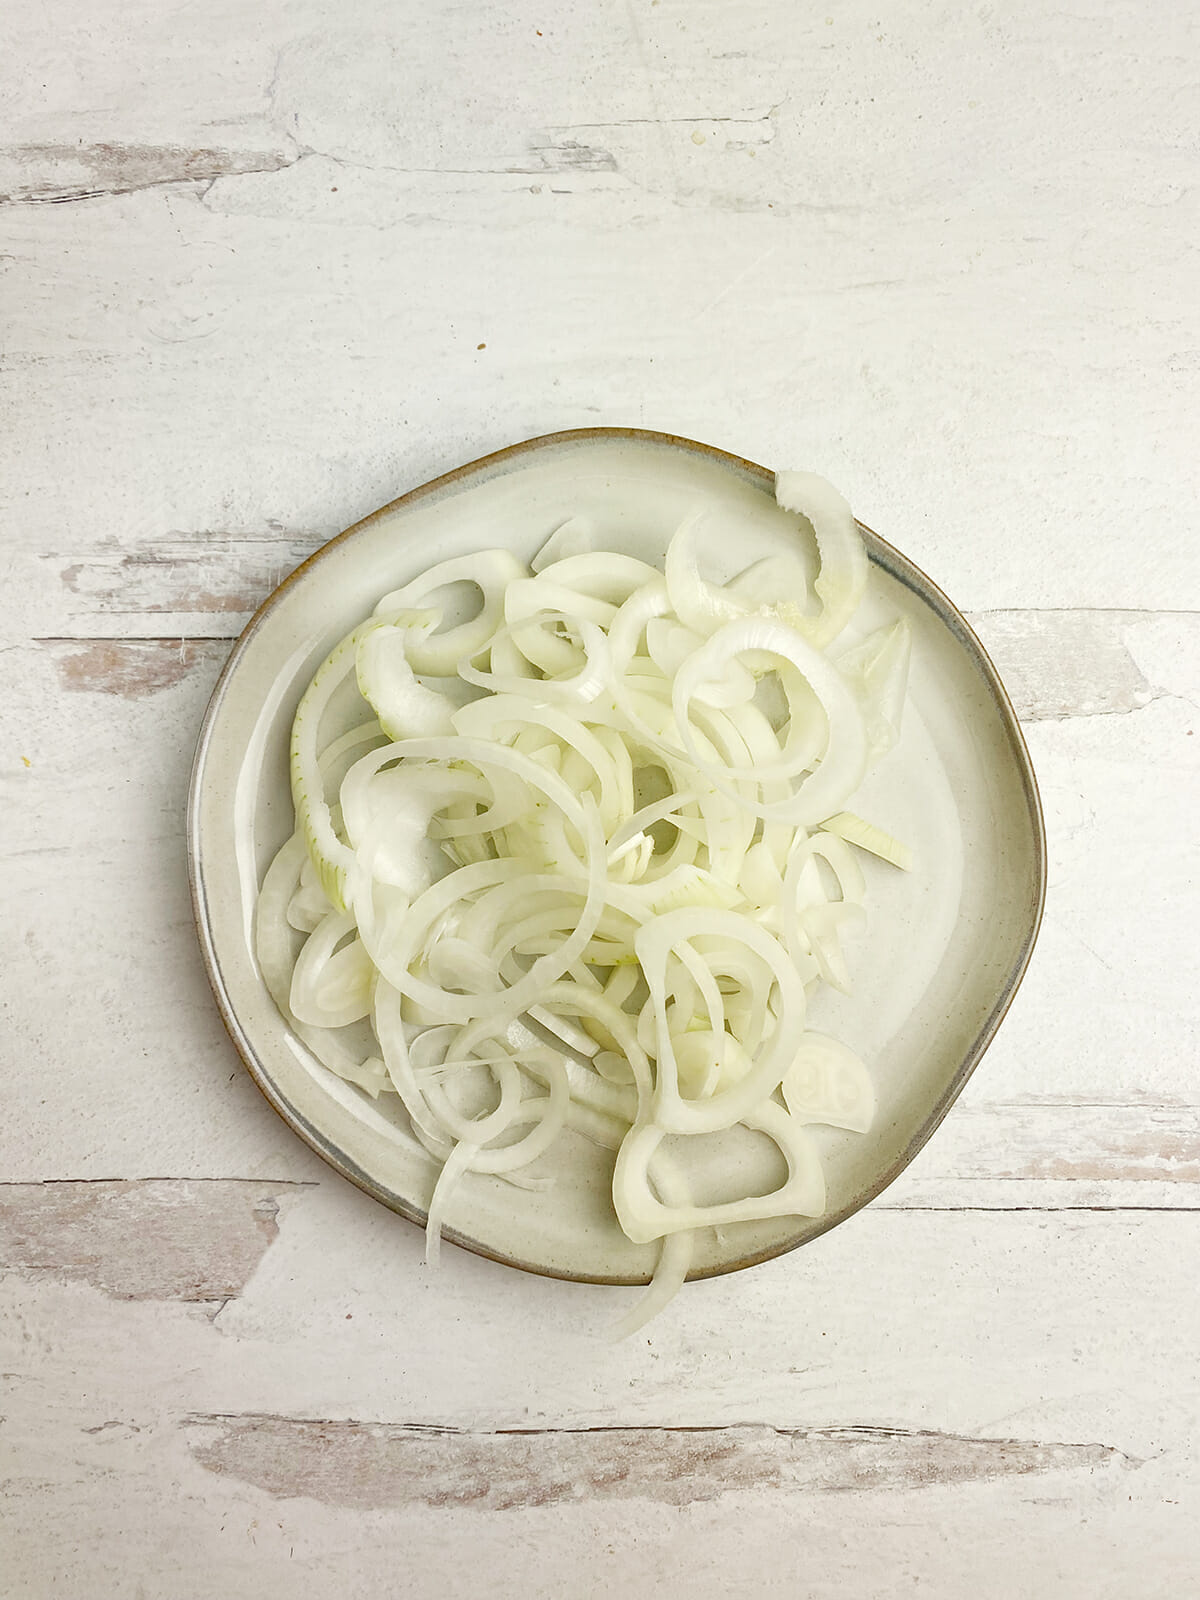 Sliced and peeled onions on a plate.